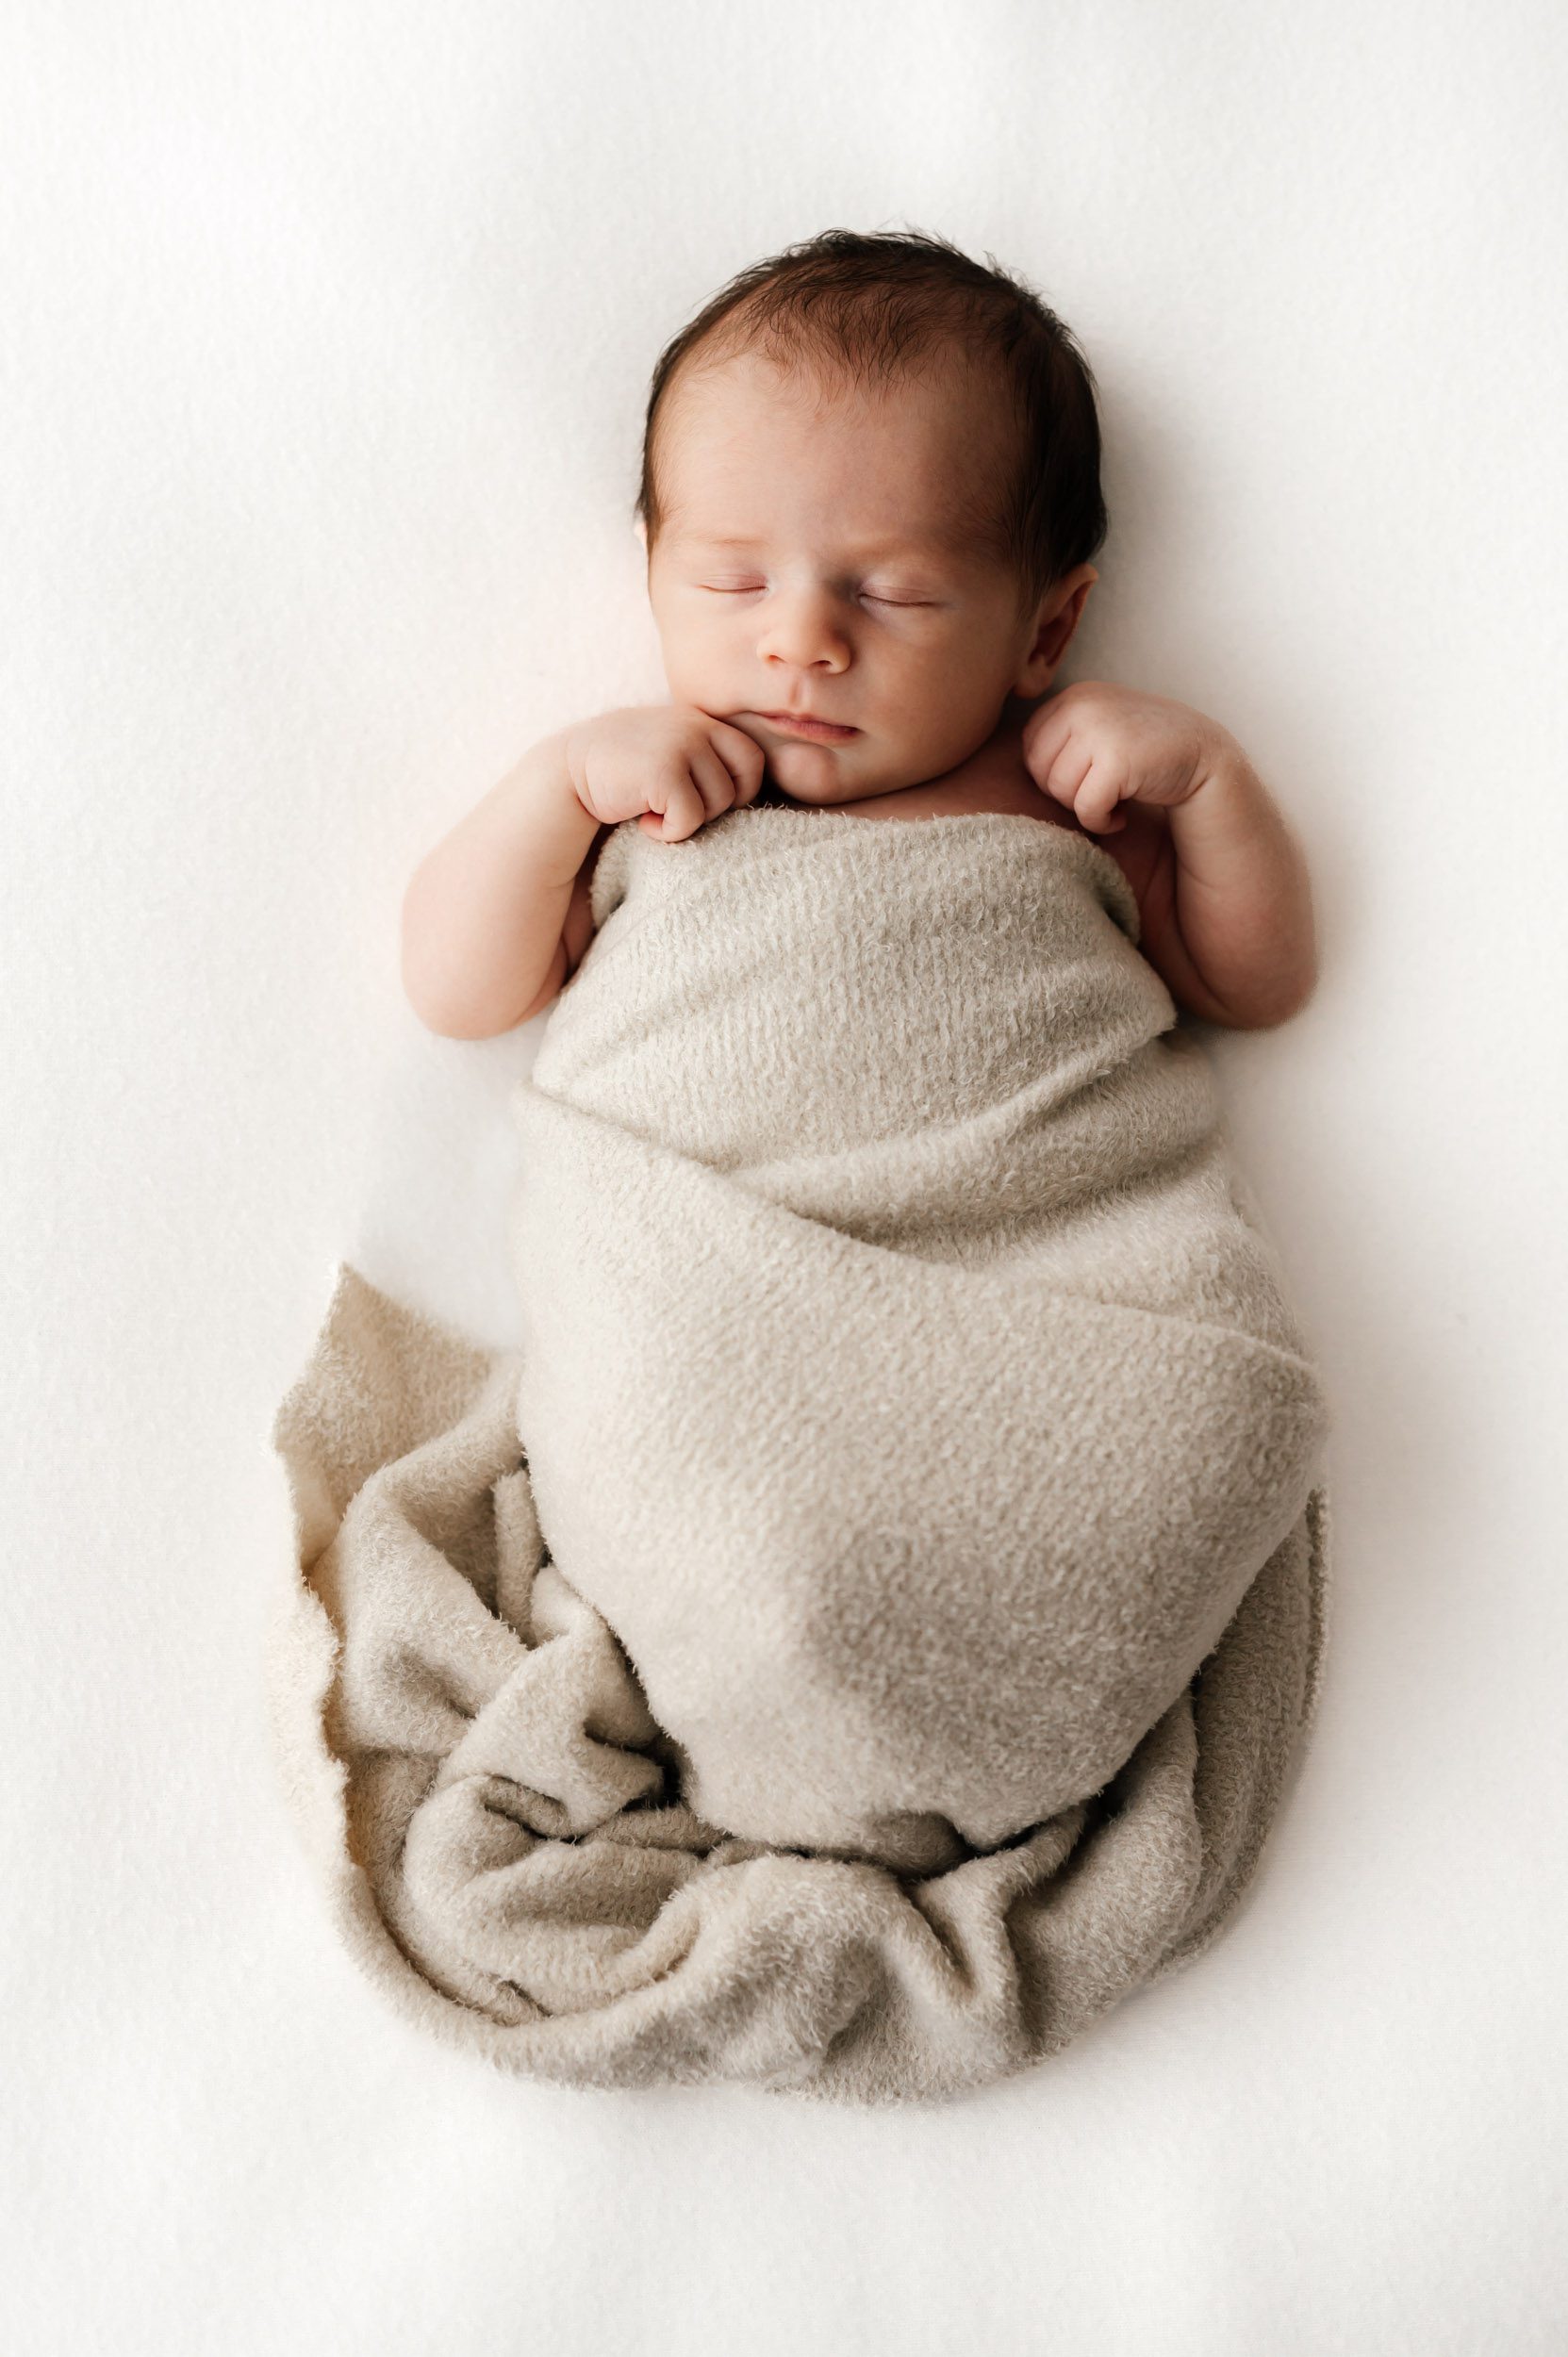 a baby boy wrapped in a fuzzy beige swaddle sleeping on a white backdrop during a newborn lifestyle photography session